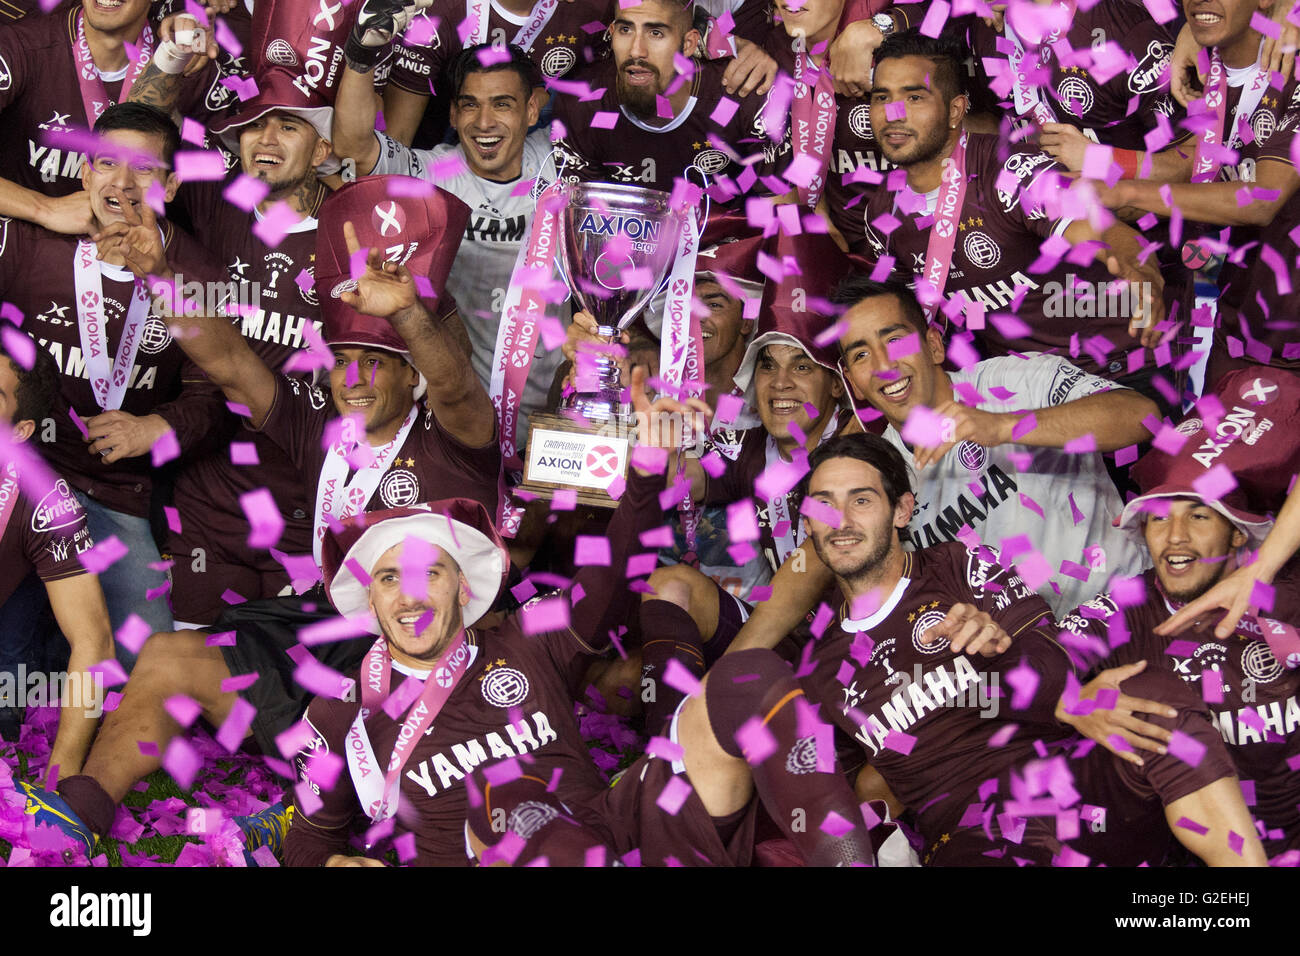 Buenos Aires, Argentina. 29th May, 2016. Lanus players celebrate after the final match of the First Division Tournament of Argentina, held at the Antonio Vespucio Liberti 'Monumental' Stadium in Buenos Aires, capital of Argentina, on May 29, 2016. Lanus won 4-0. © Martin Zabala/Xinhua/Alamy Live News Stock Photo